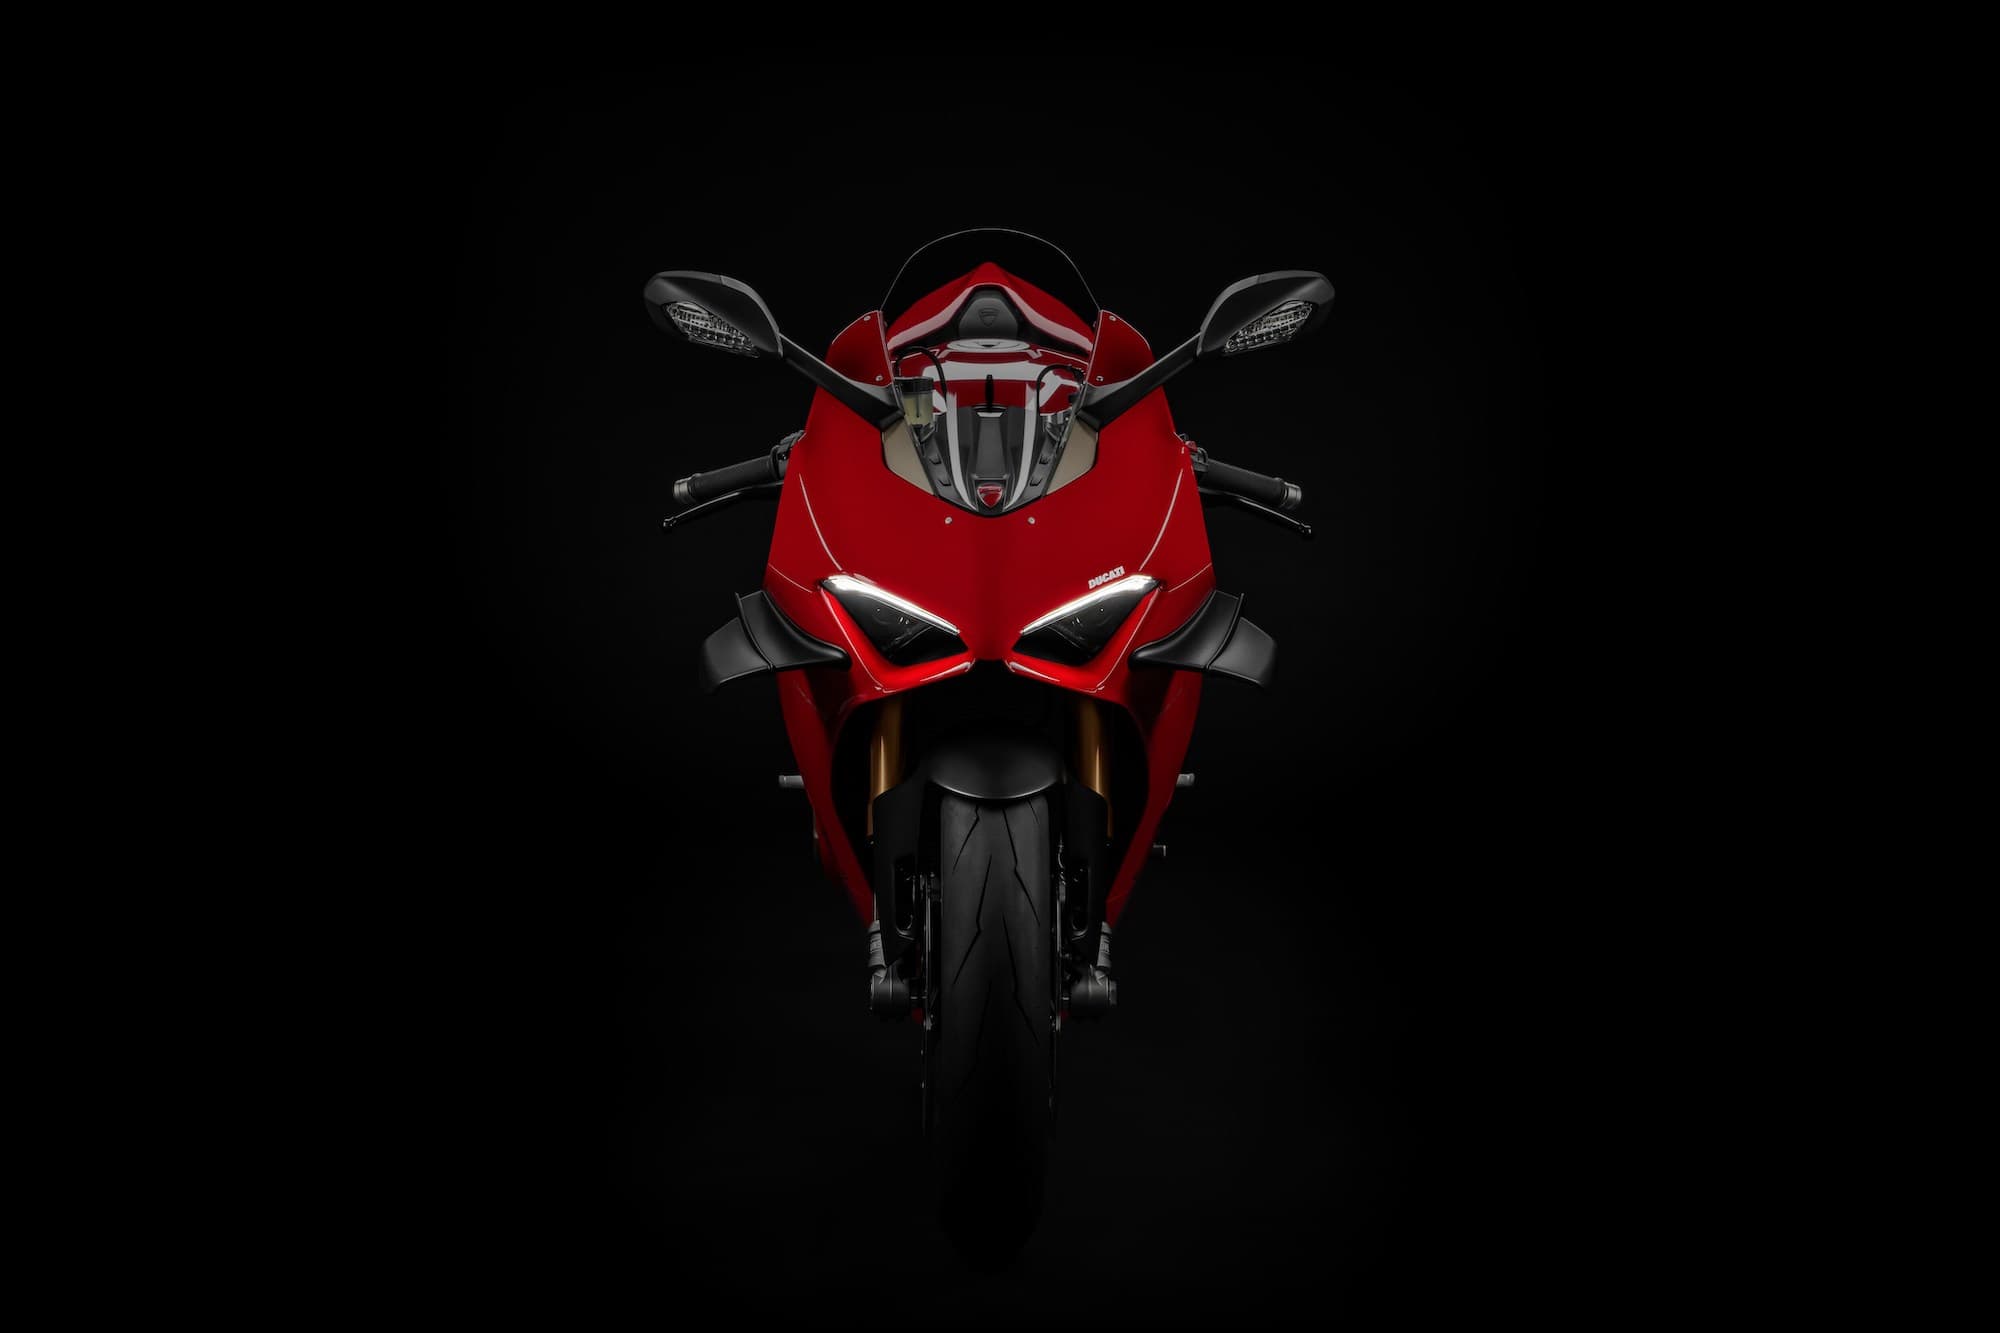 Ducati Panigale V4 S studio front with DRLs